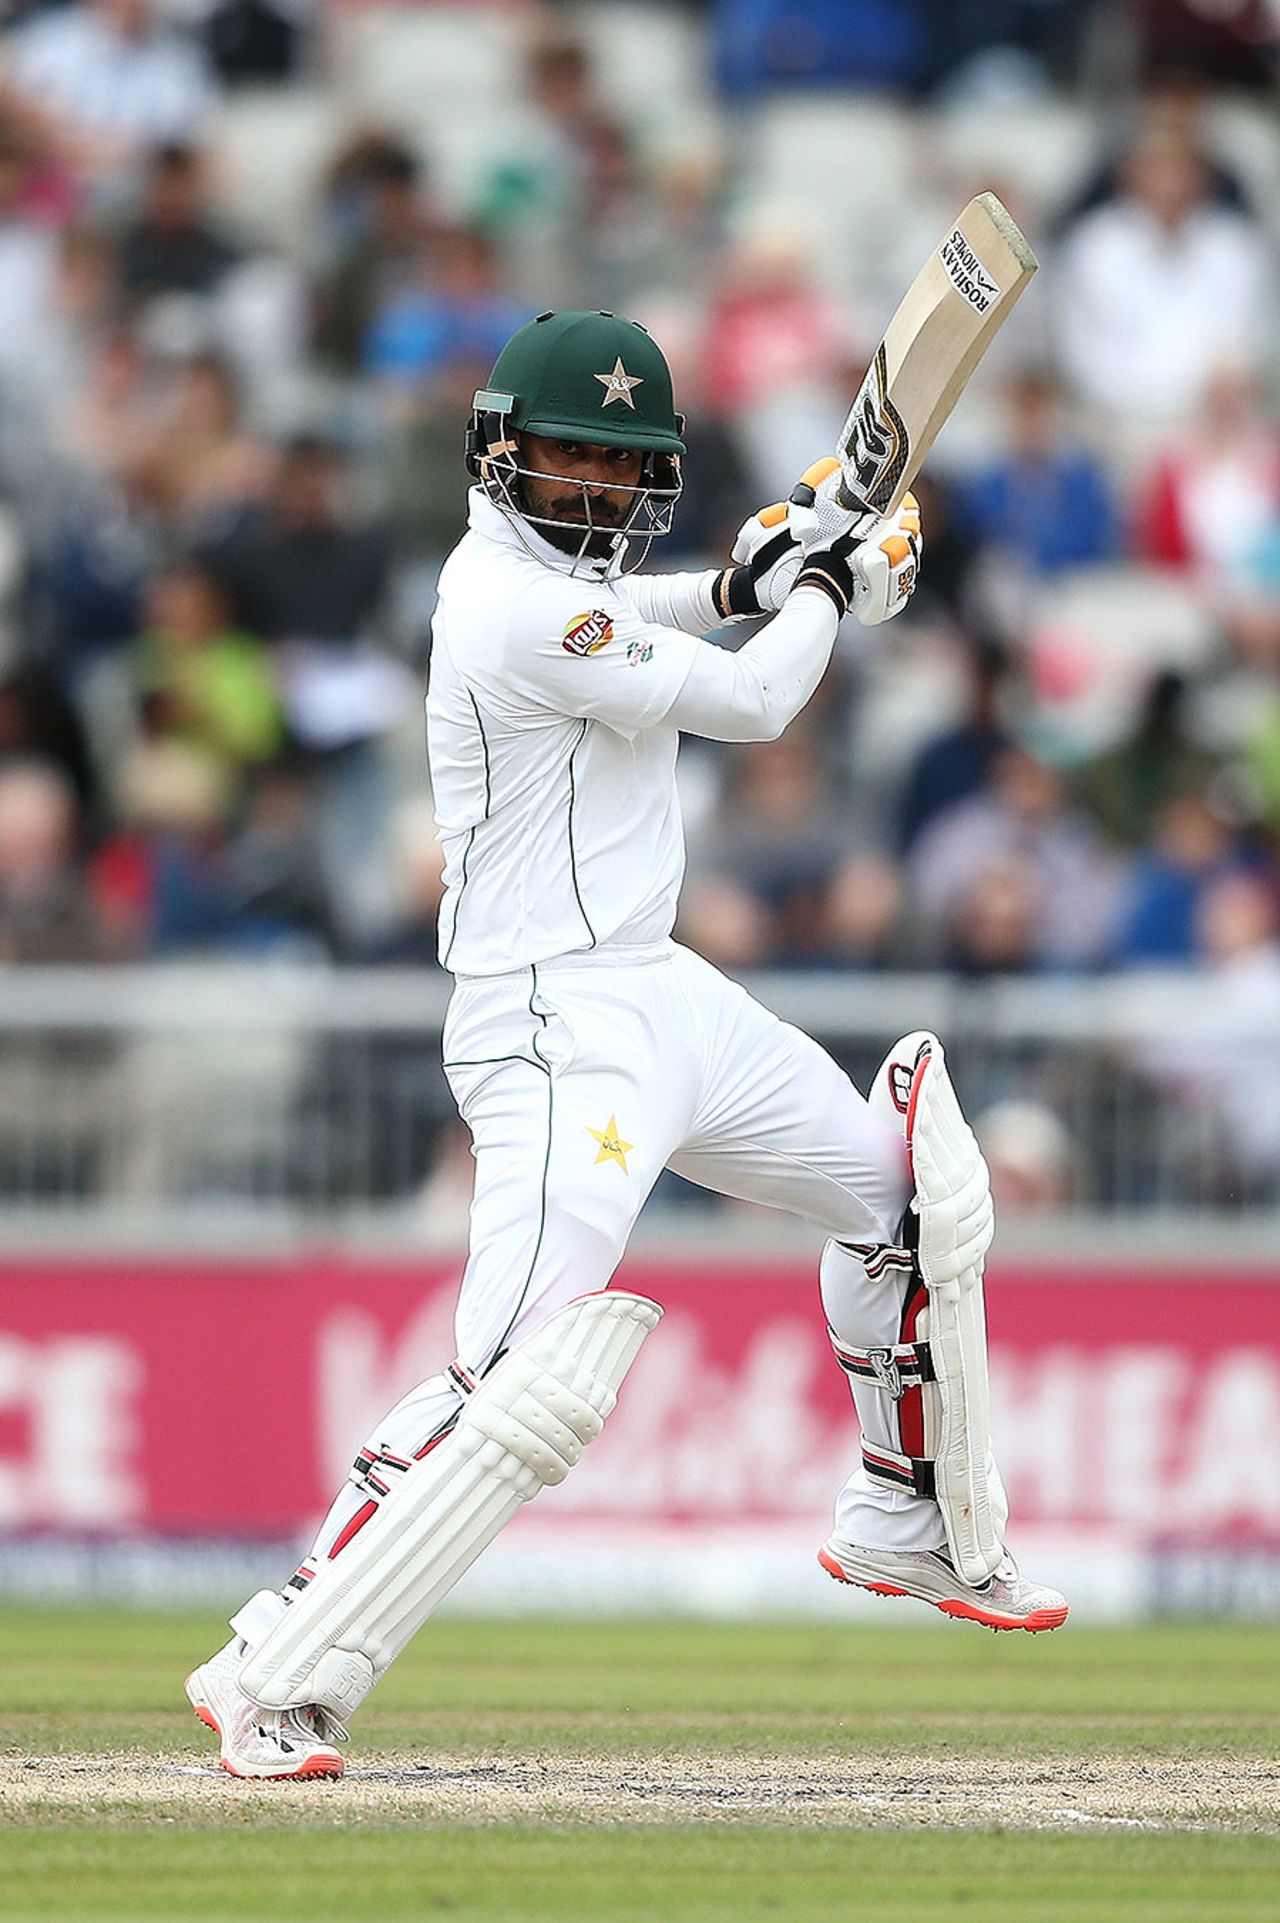 Mohammad Hafeez dug in for Pakistan before lunch, England v Pakistan, 2nd Investec Test, Old Trafford, 4th day, July 25, 2016